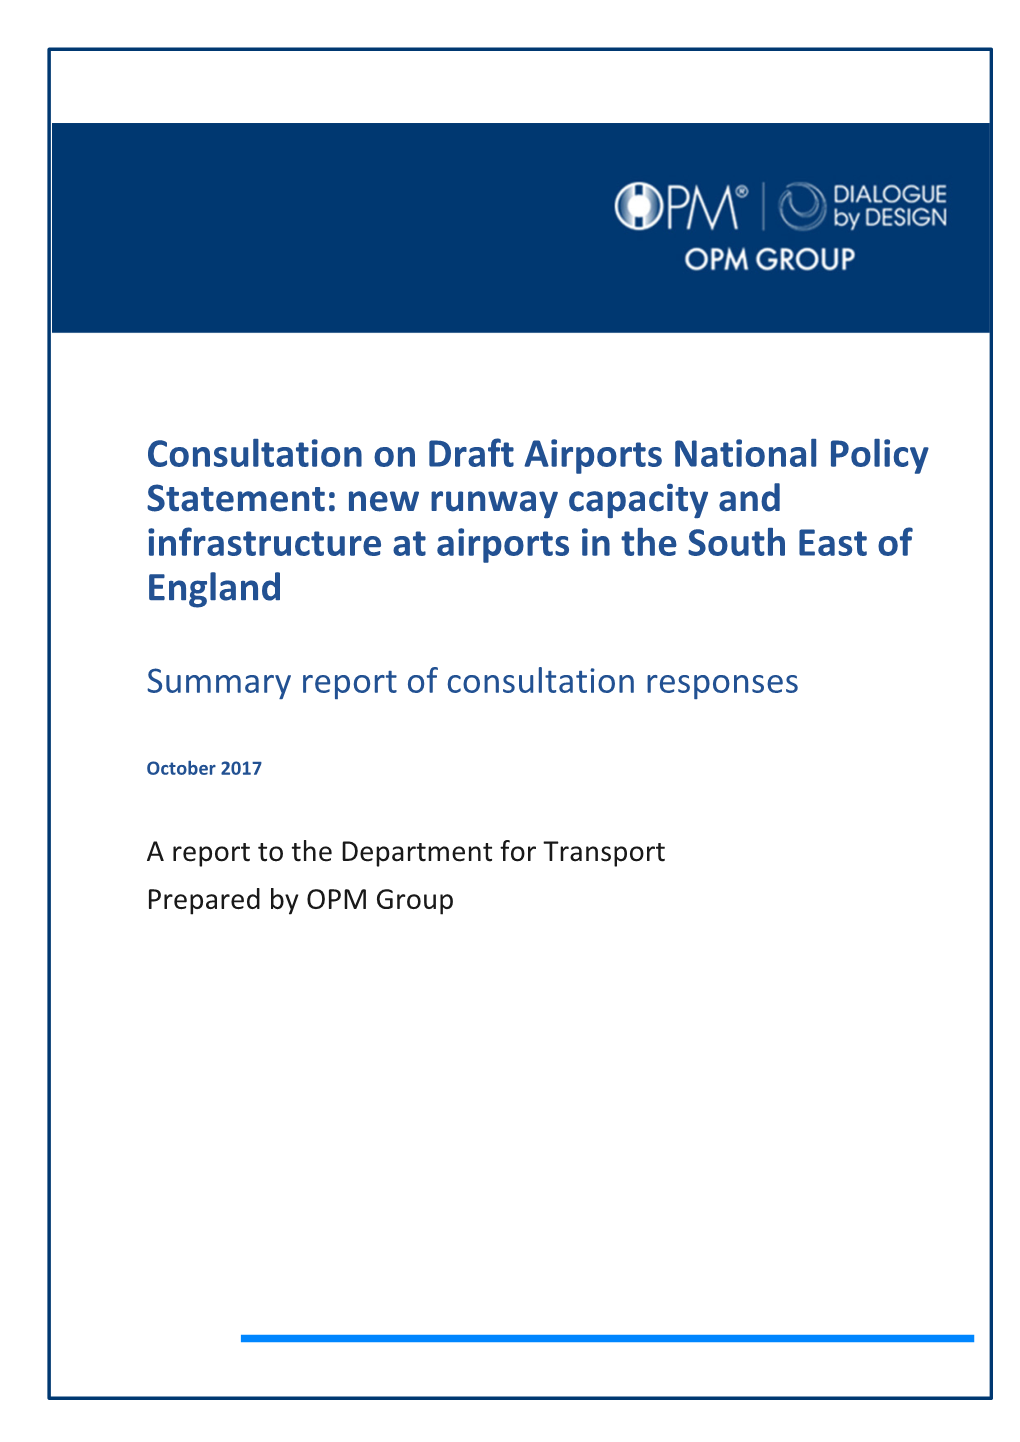 Consultation on Draft Airports National Policy Statement: New Runway Capacity and Infrastructure at Airports in the South East of England